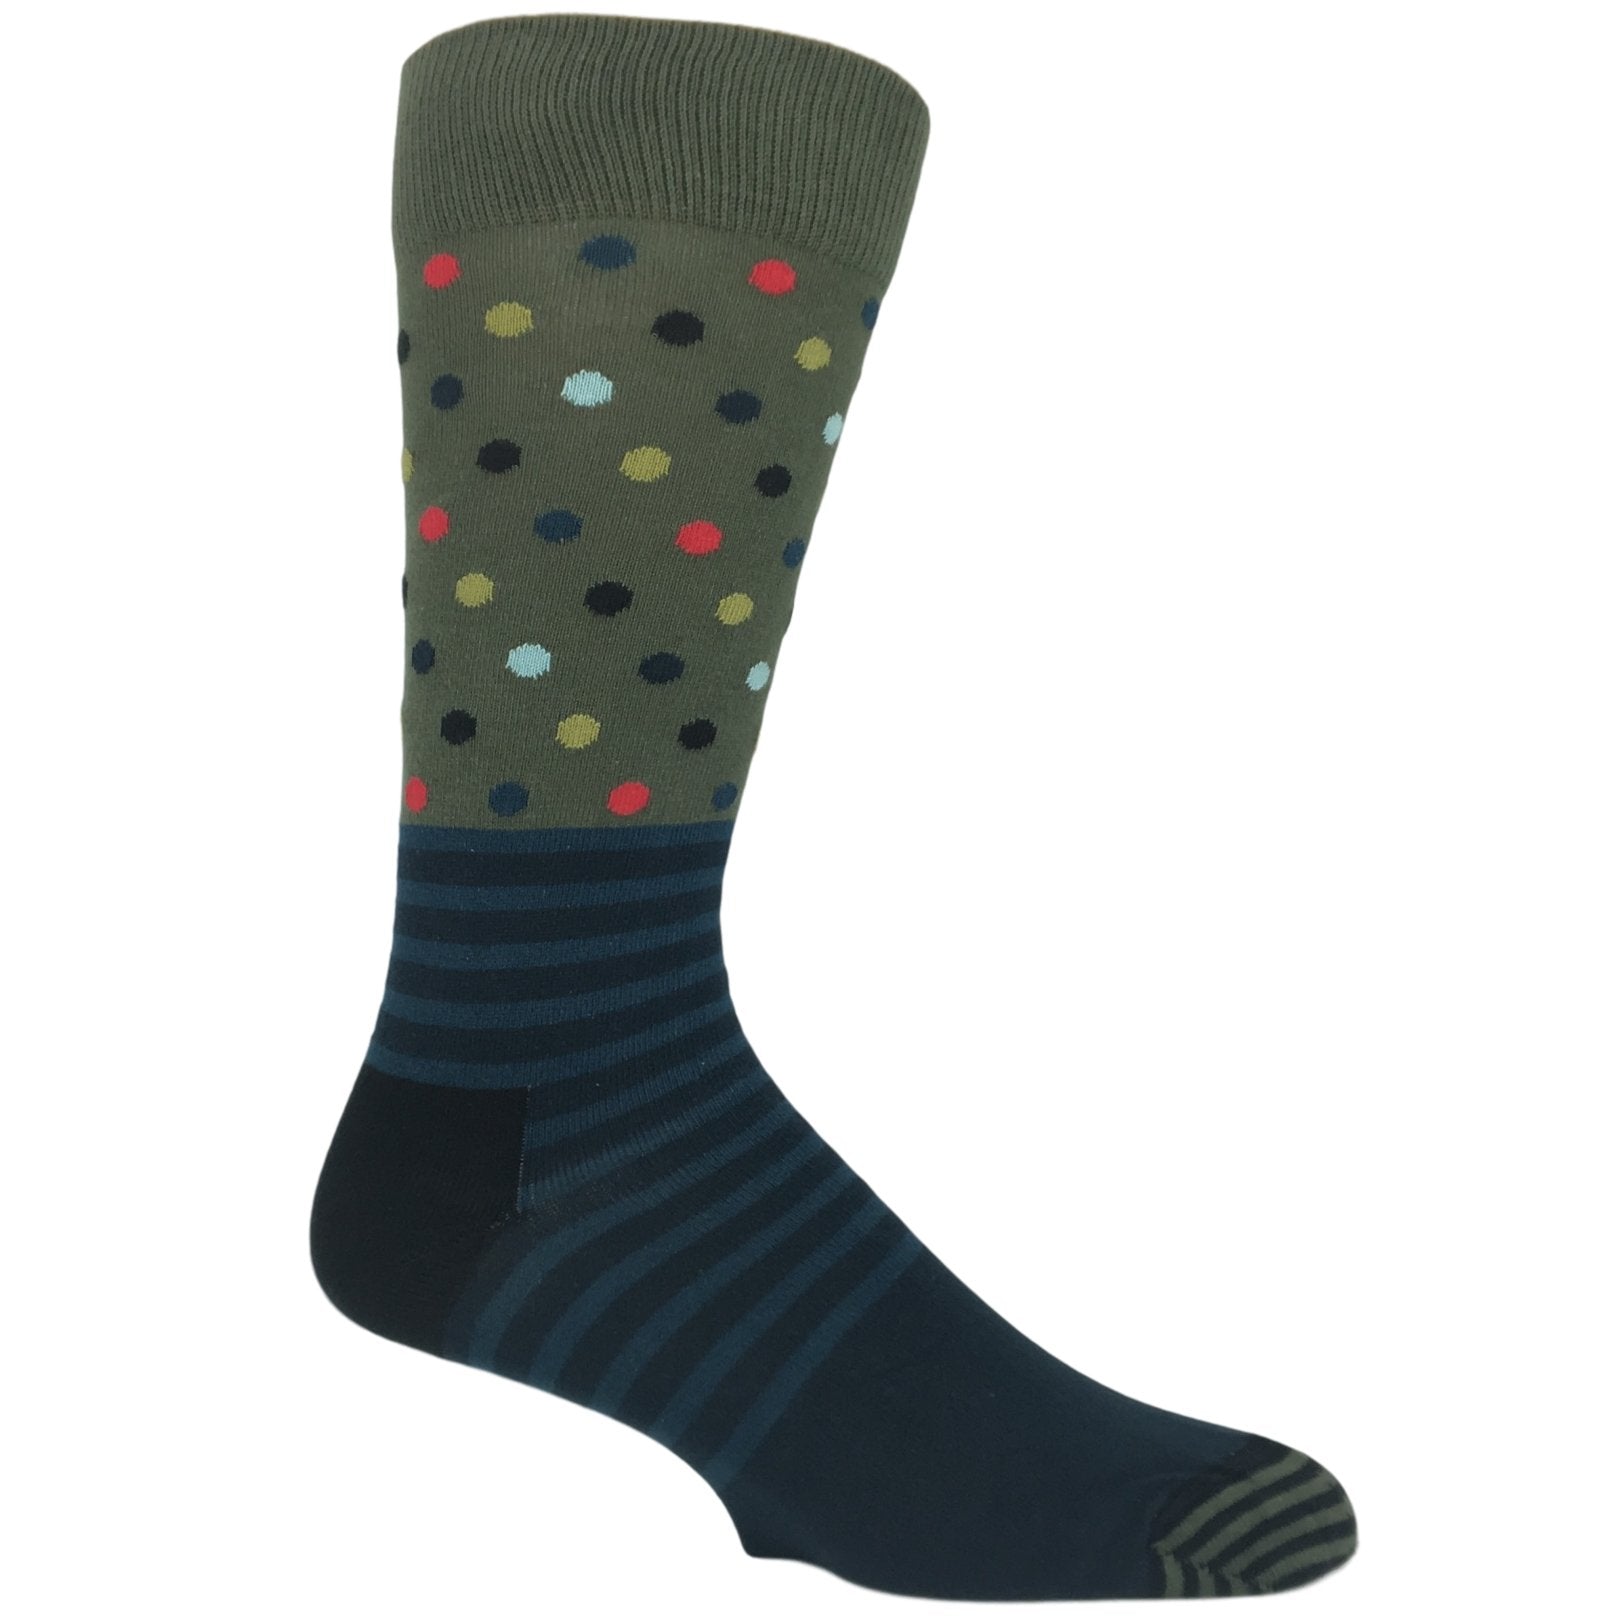 Green and Blue Stripes & Dots Socks by Happy Socks